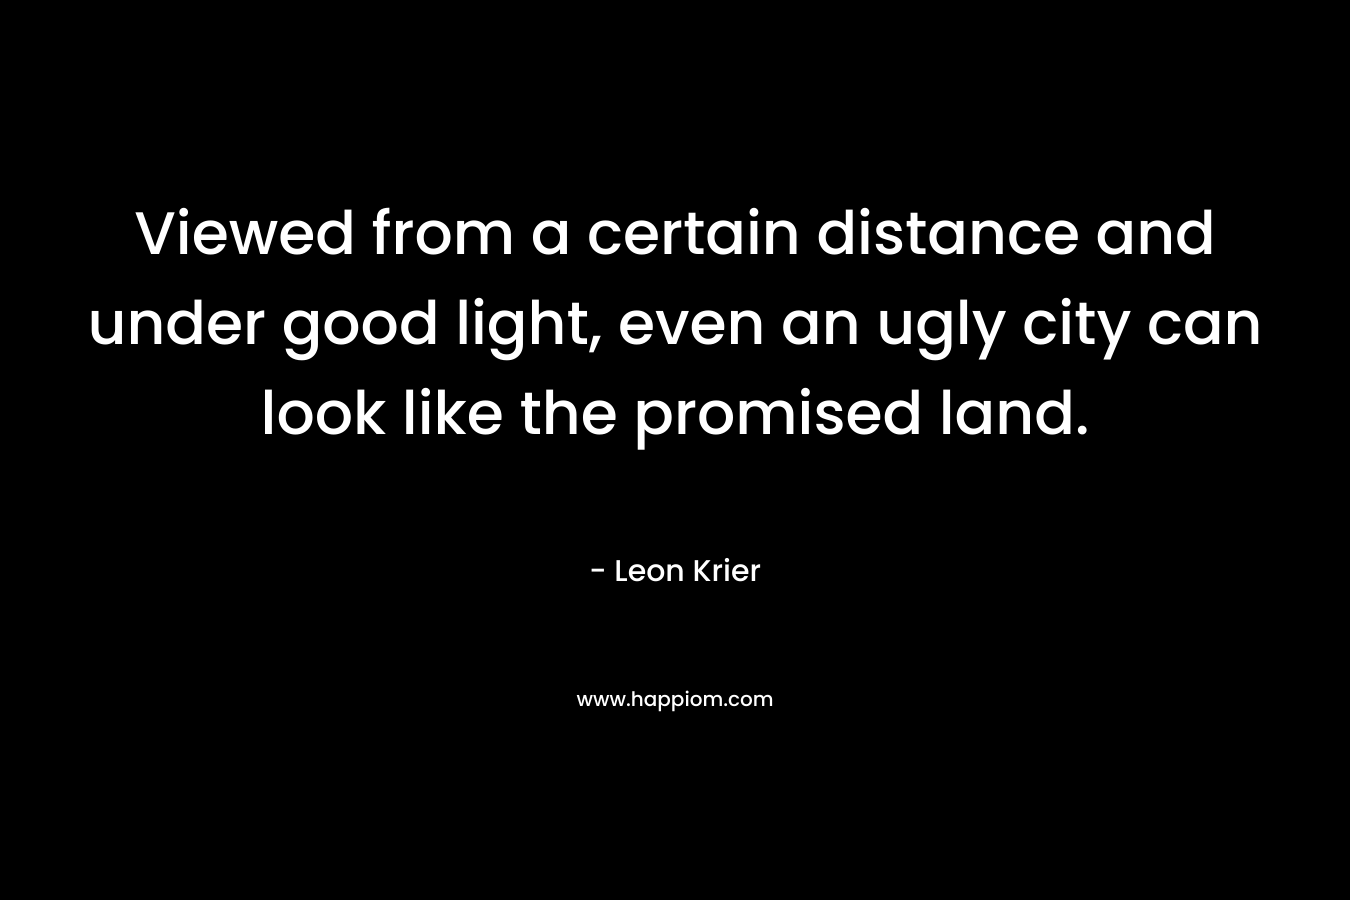 Viewed from a certain distance and under good light, even an ugly city can look like the promised land. – Leon Krier